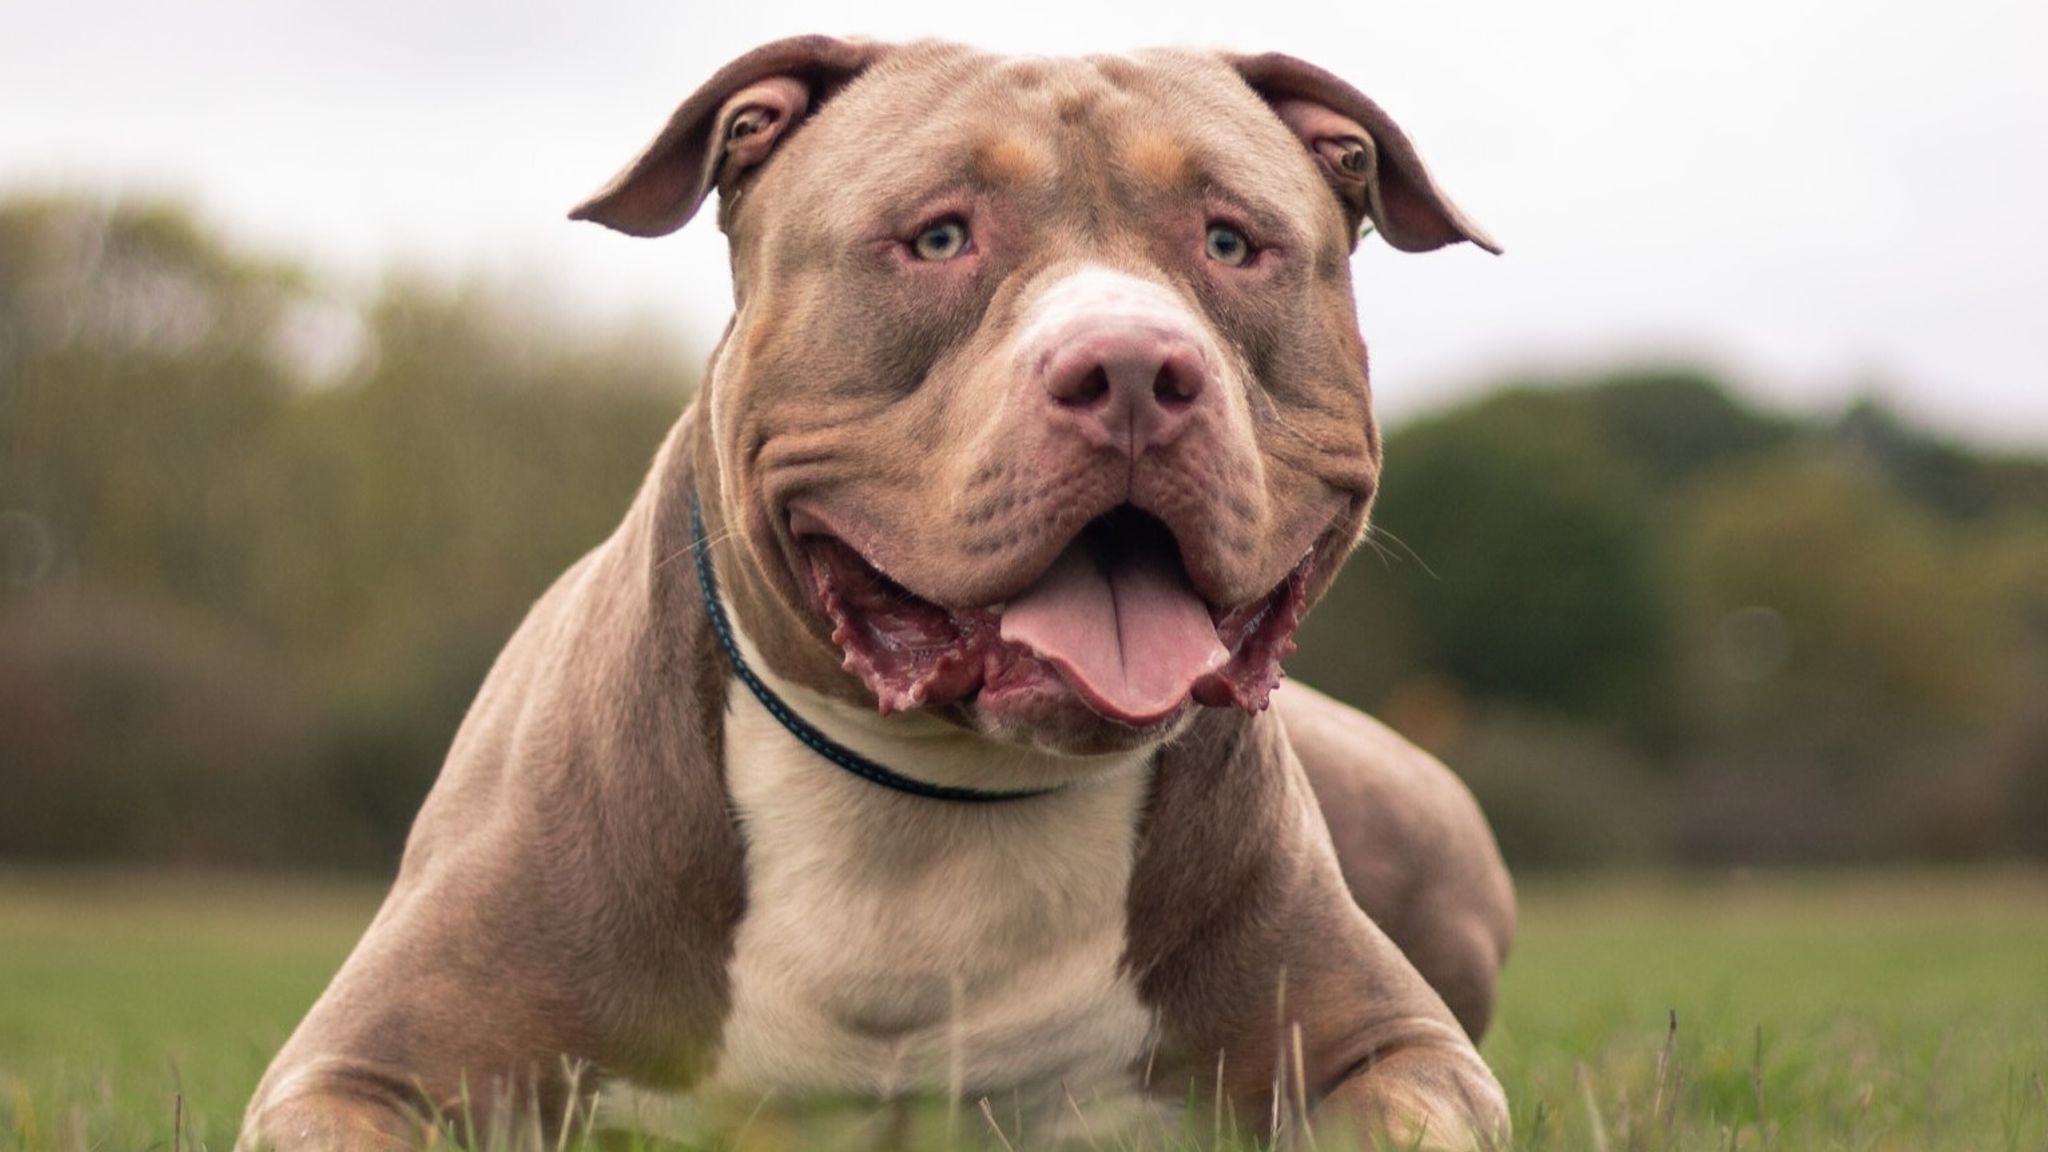 Are Bully Dogs Dangerous?